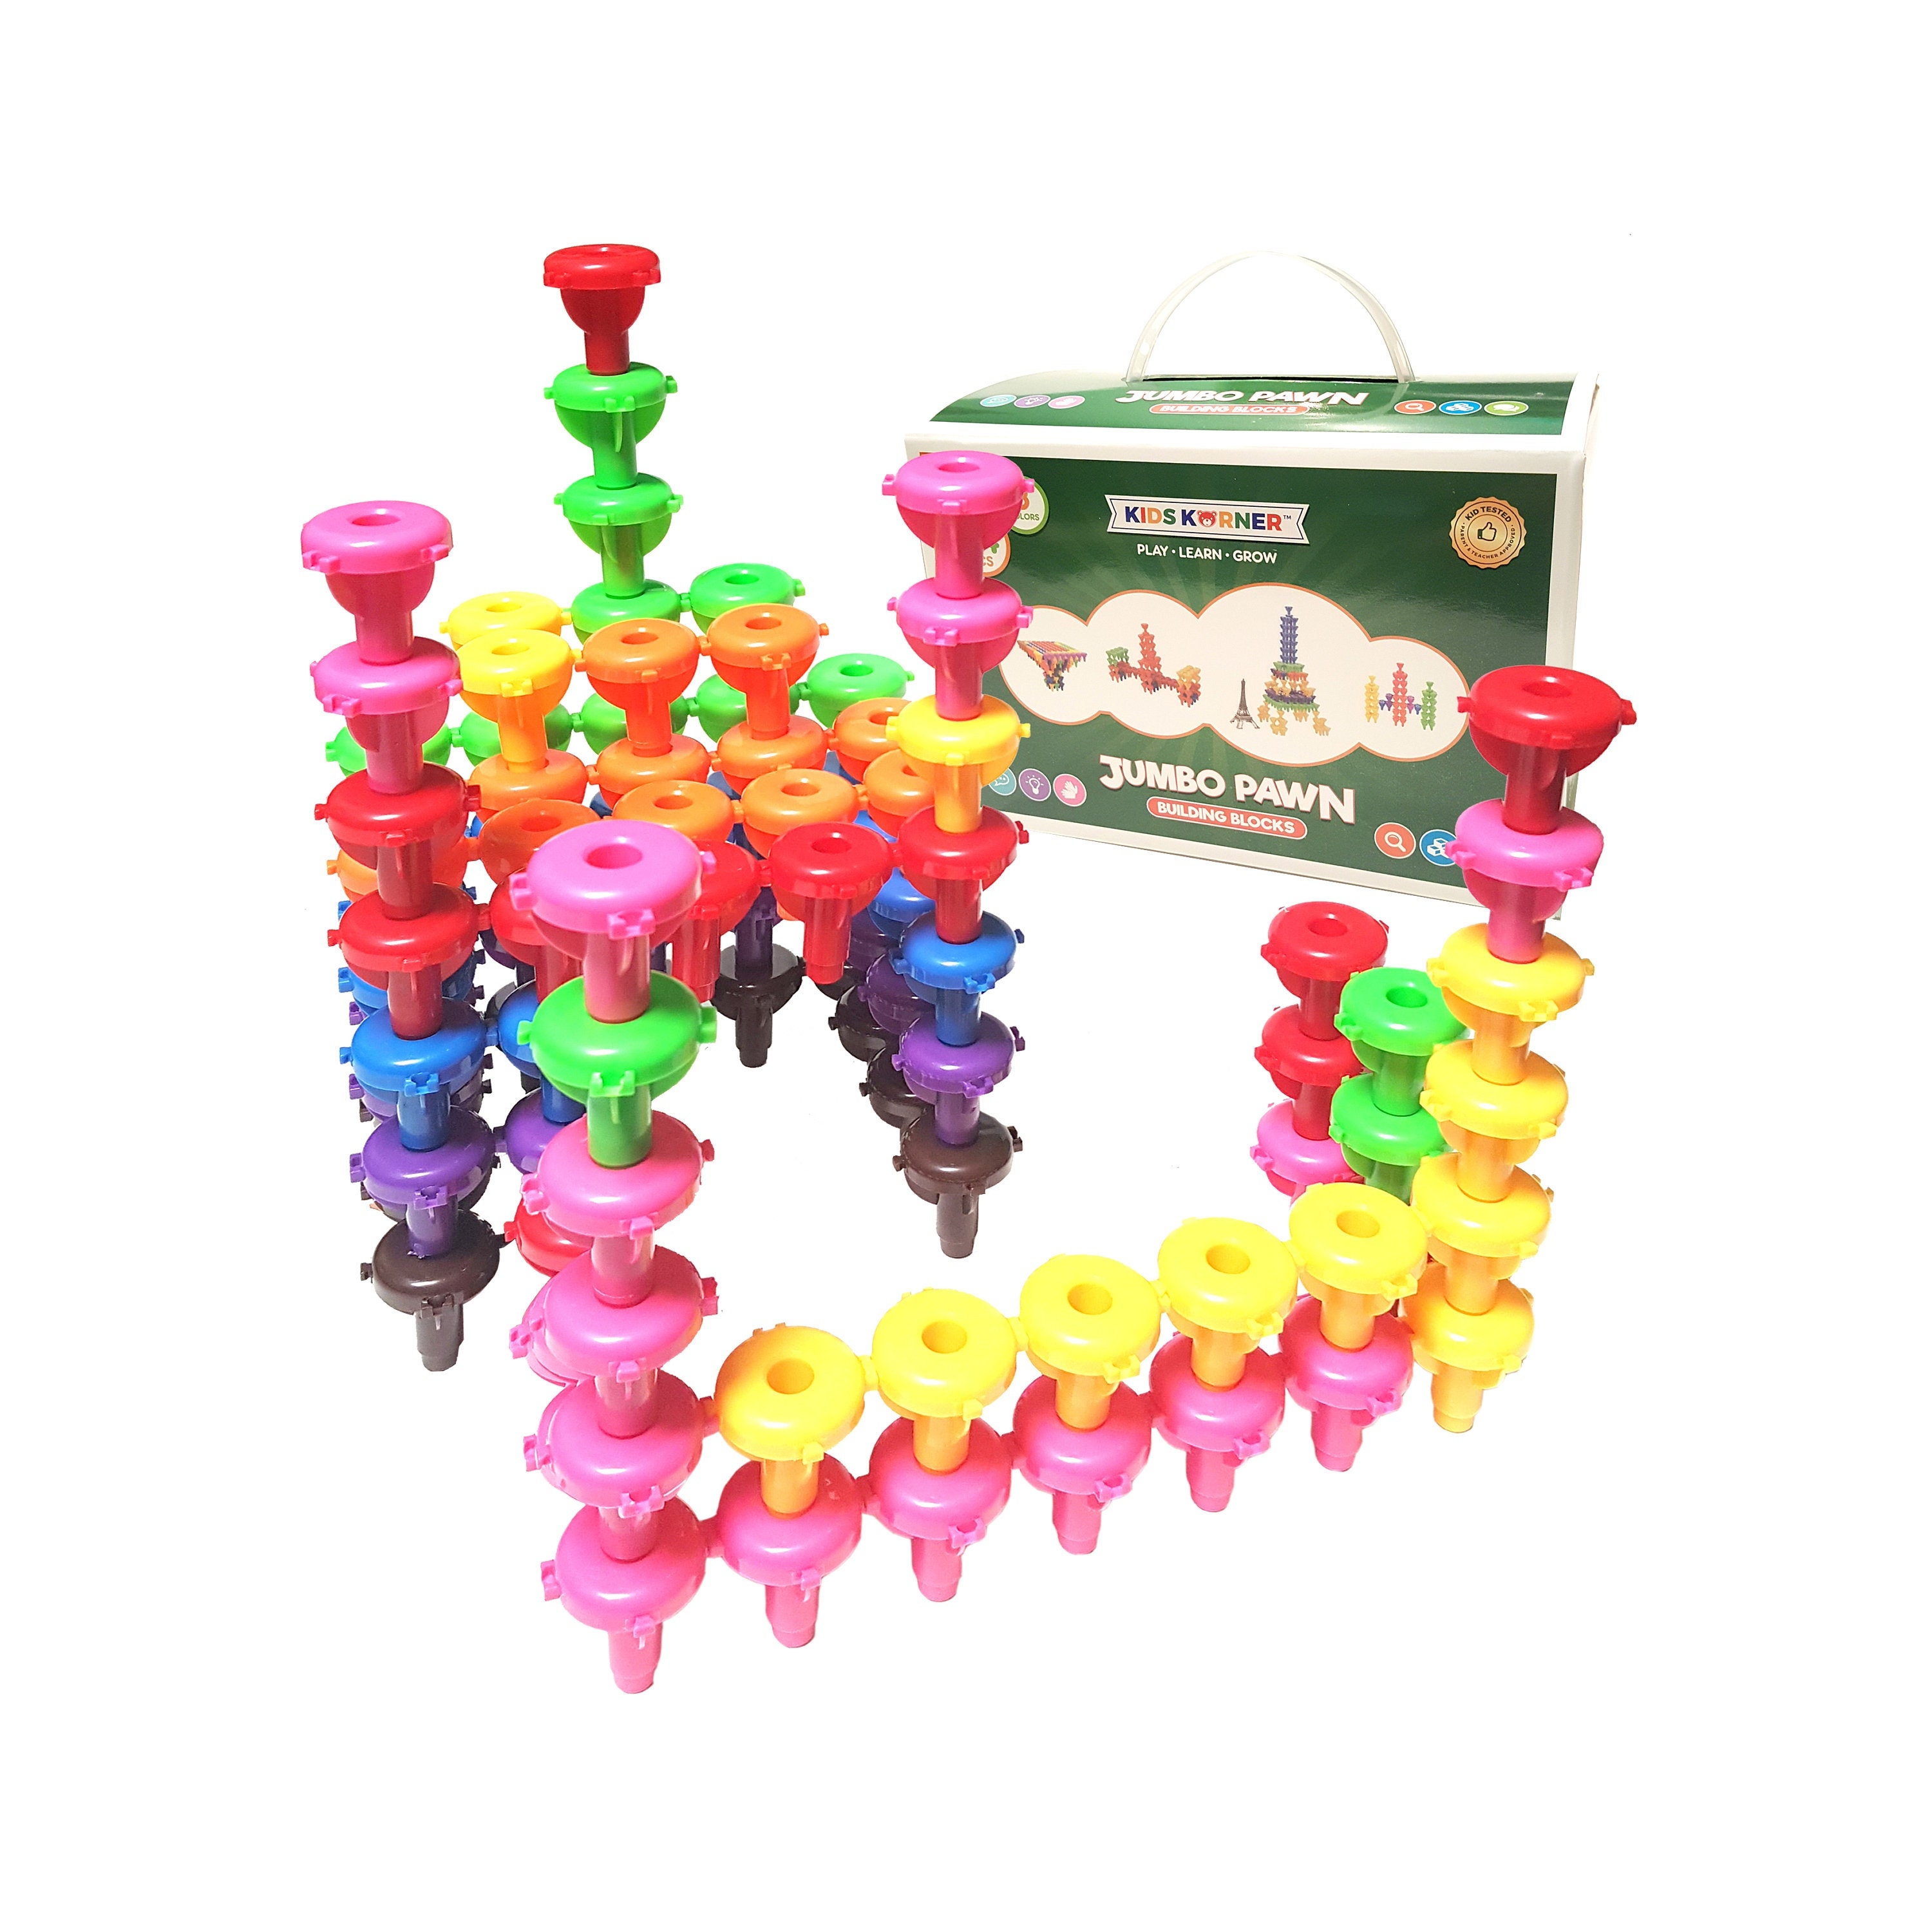 Stack It Peg Game with Board Occupational Therapy for Autism (1 Board and 30 Pegs)